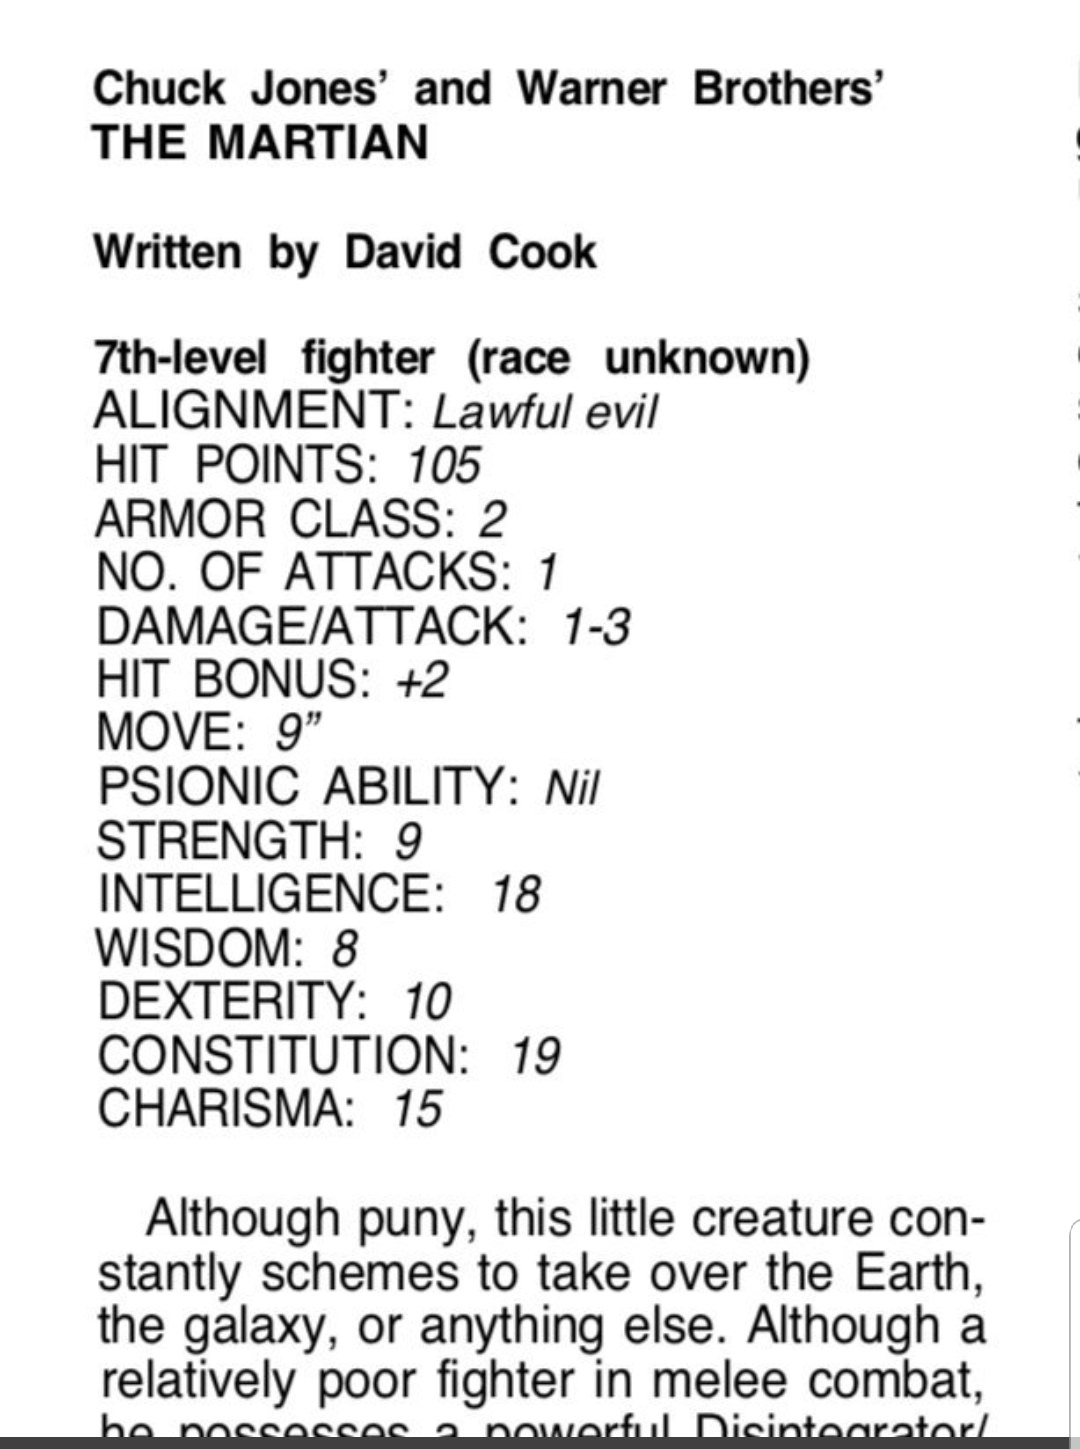 Shocking Reveal Of The Day- Bugs Bunny Is An Advanced Dungeons And Dragons Character